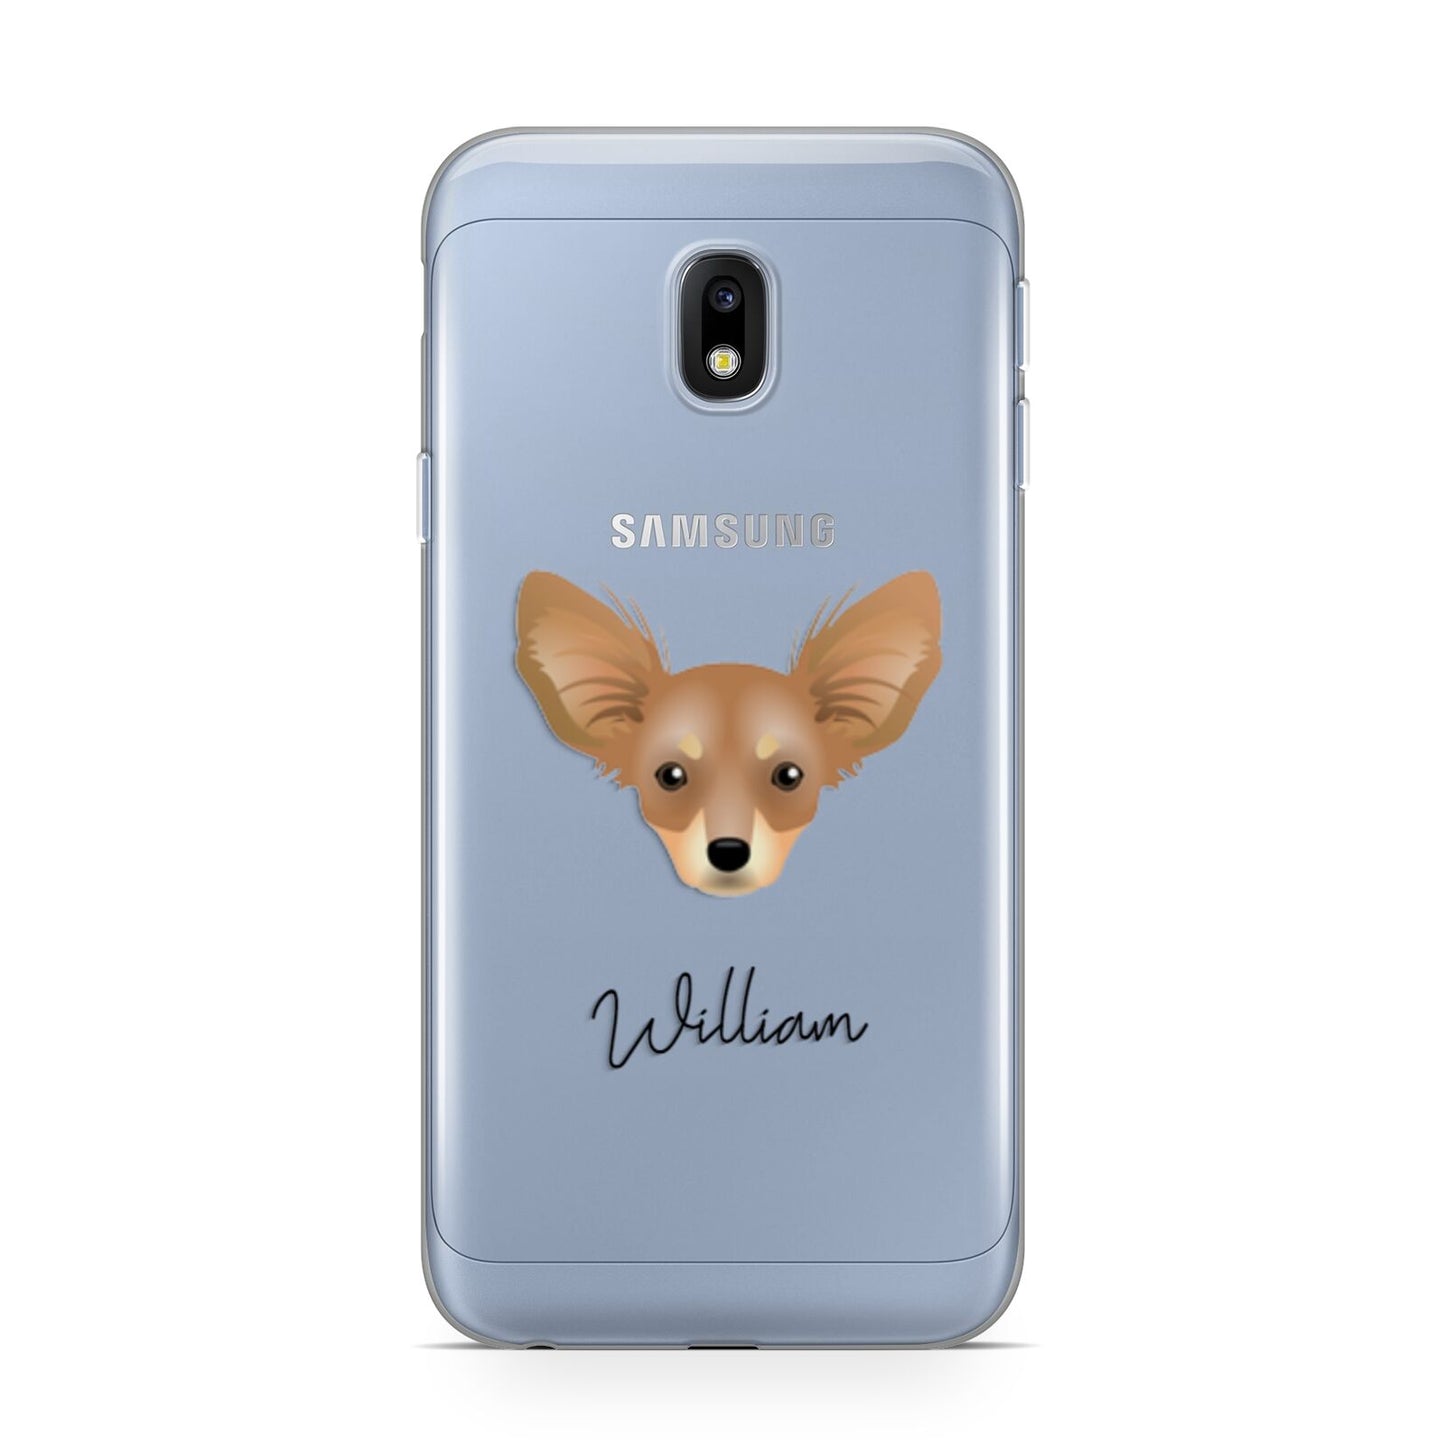 Russian Toy Personalised Samsung Galaxy J3 2017 Case